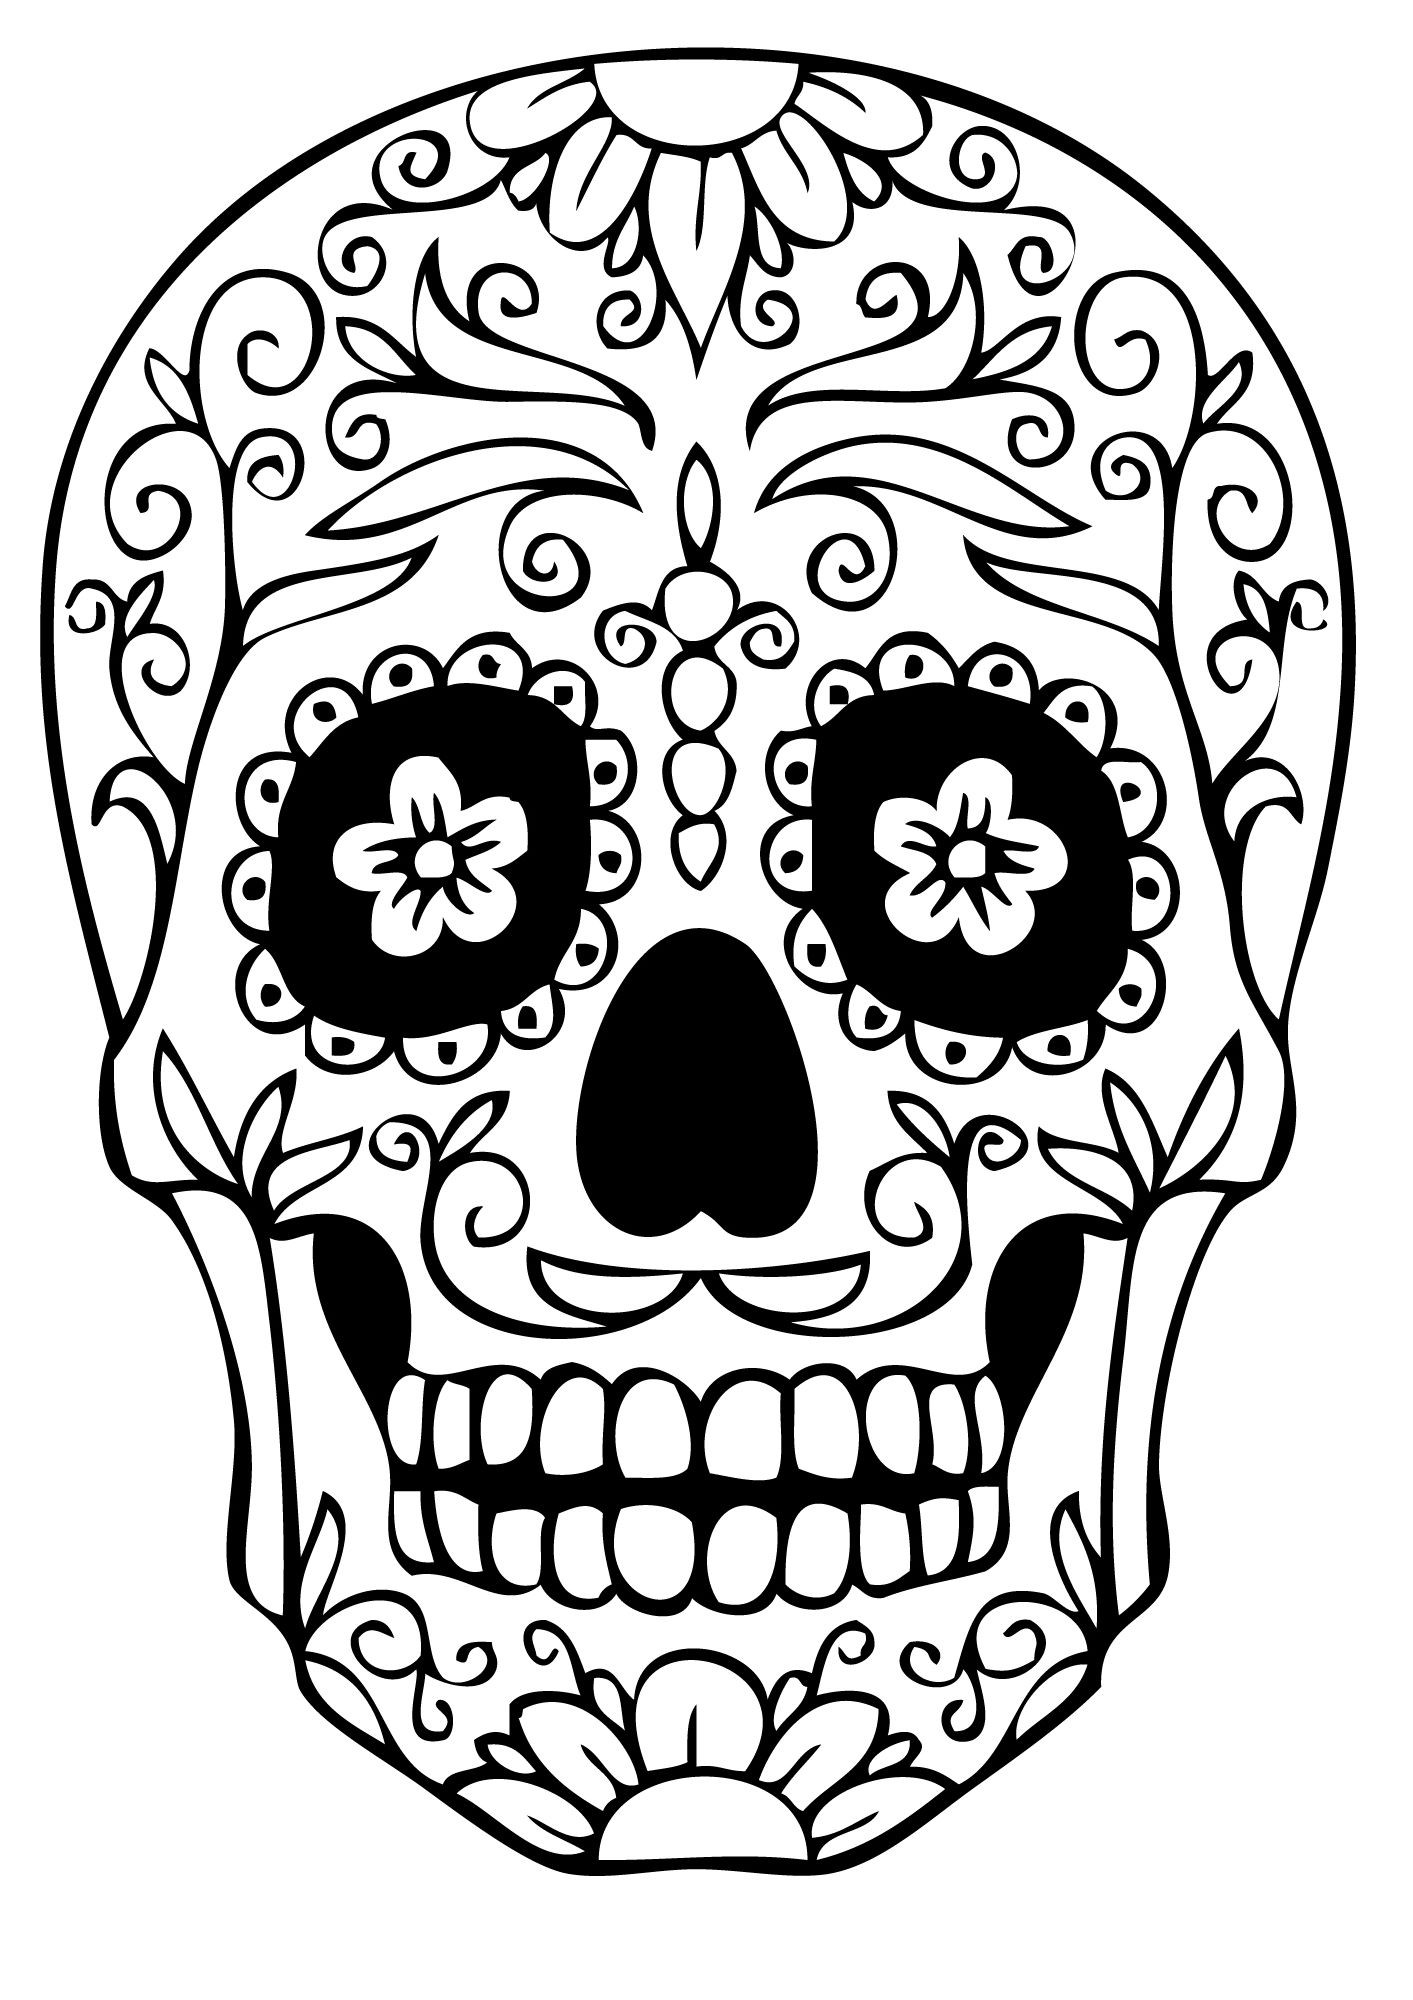 Coloring Pages Of Skulls
 Sugar Skull Coloring Pages Best Coloring Pages For Kids